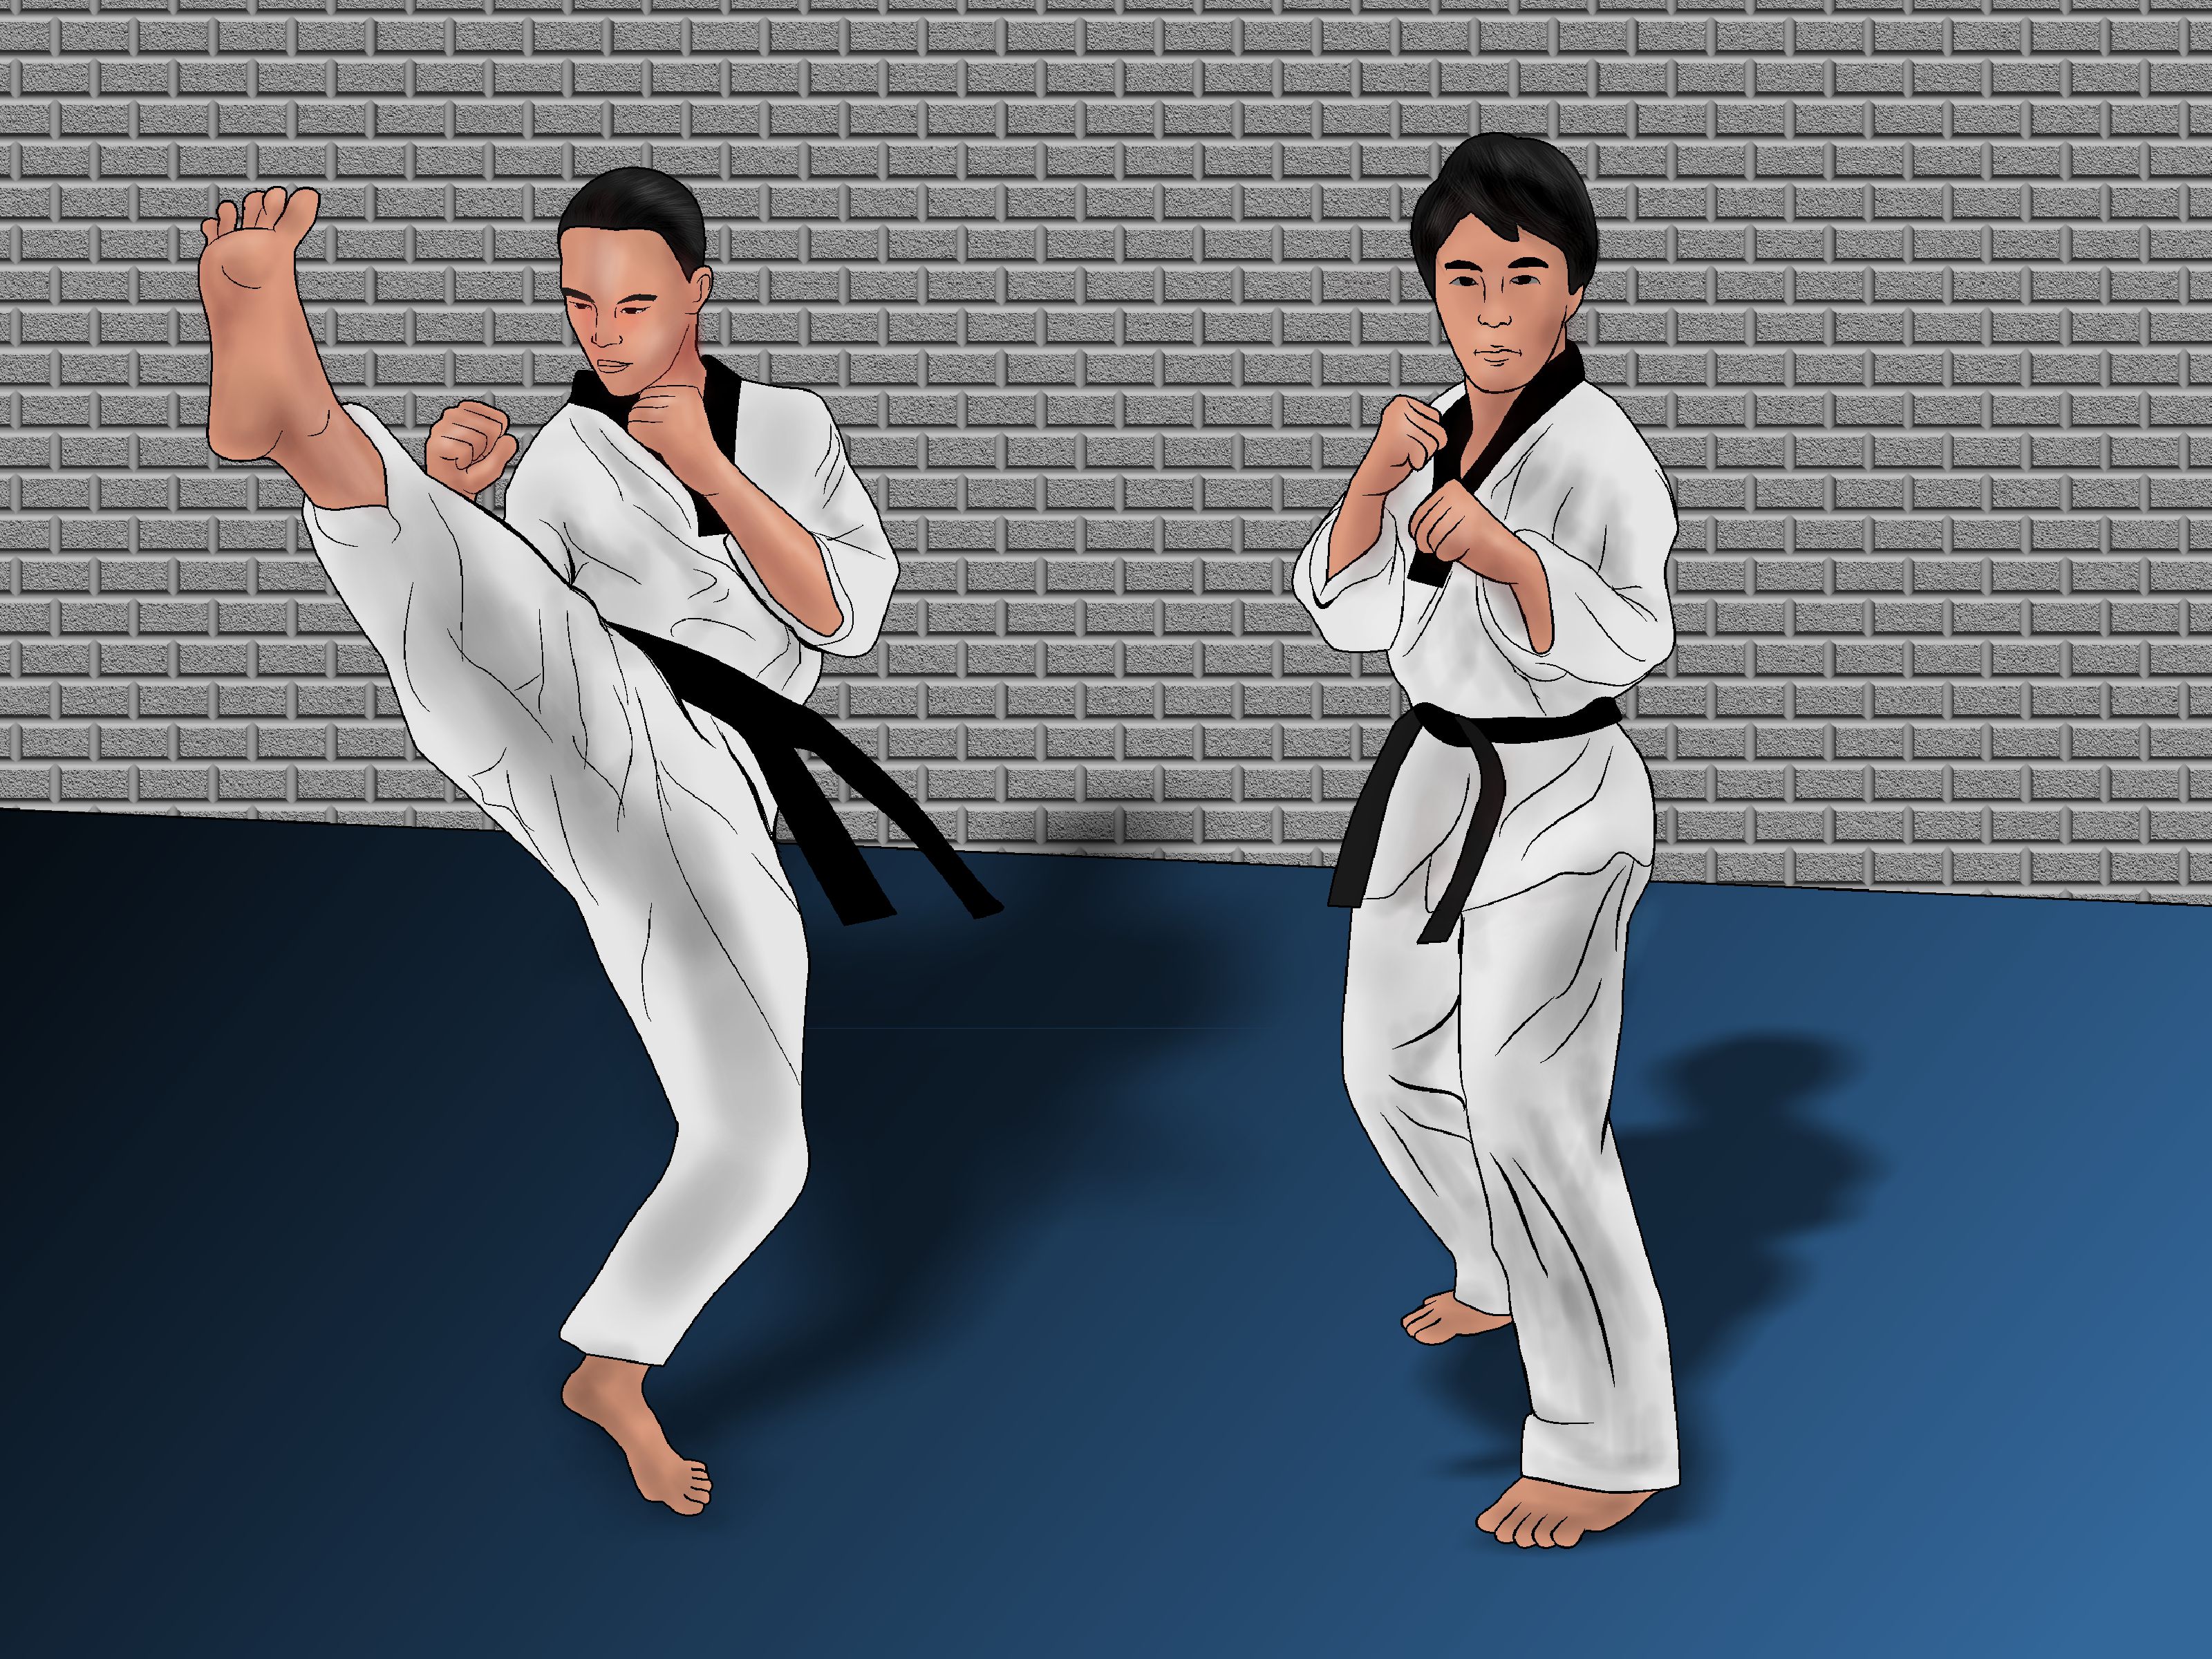 3 Ways to Win in Competitive Sparring (Taekwondo) - wikiHow